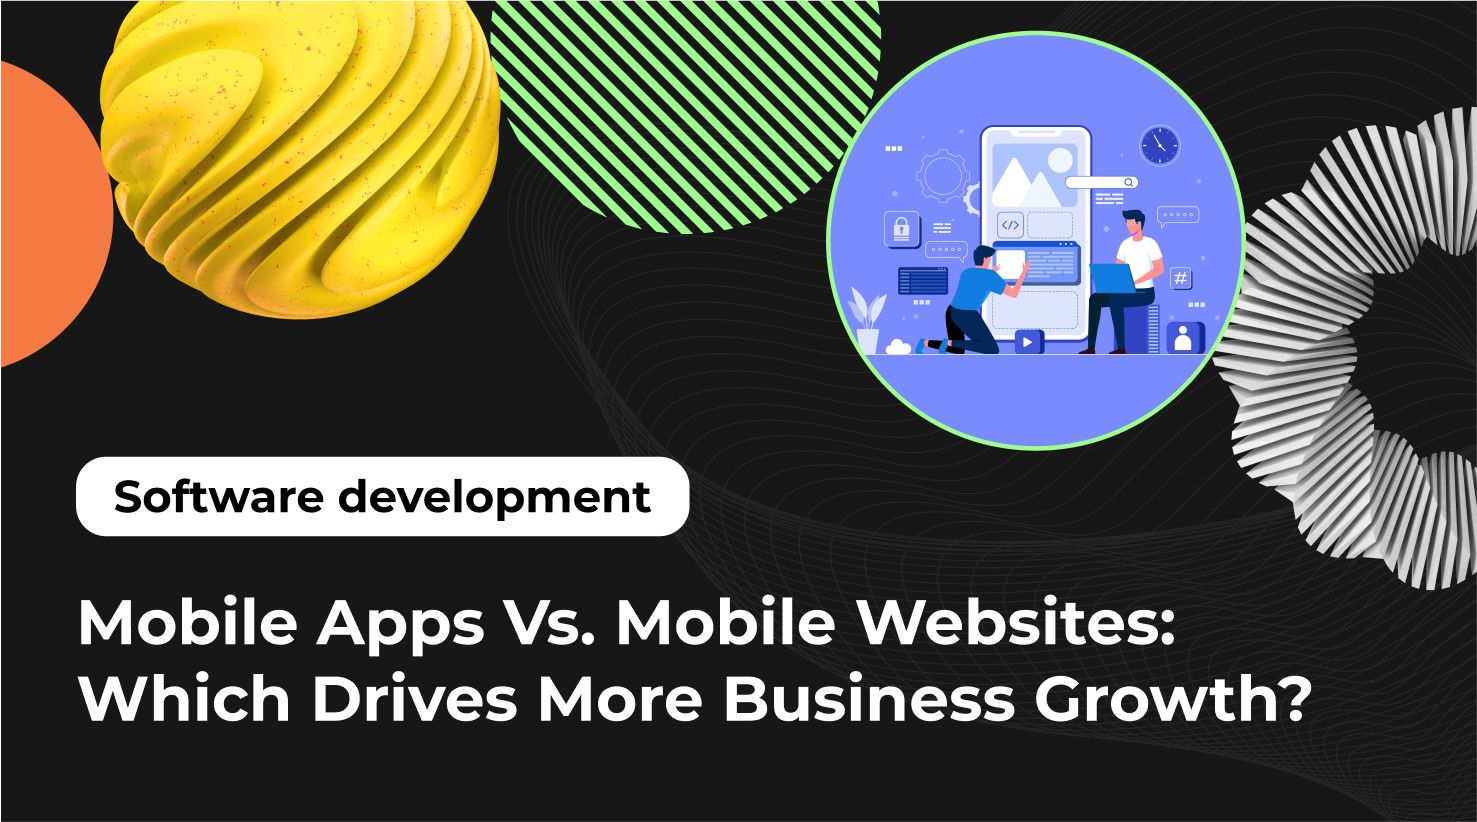 Mobile Apps Vs. Mobile Websites: Which Drives More Business Growth?